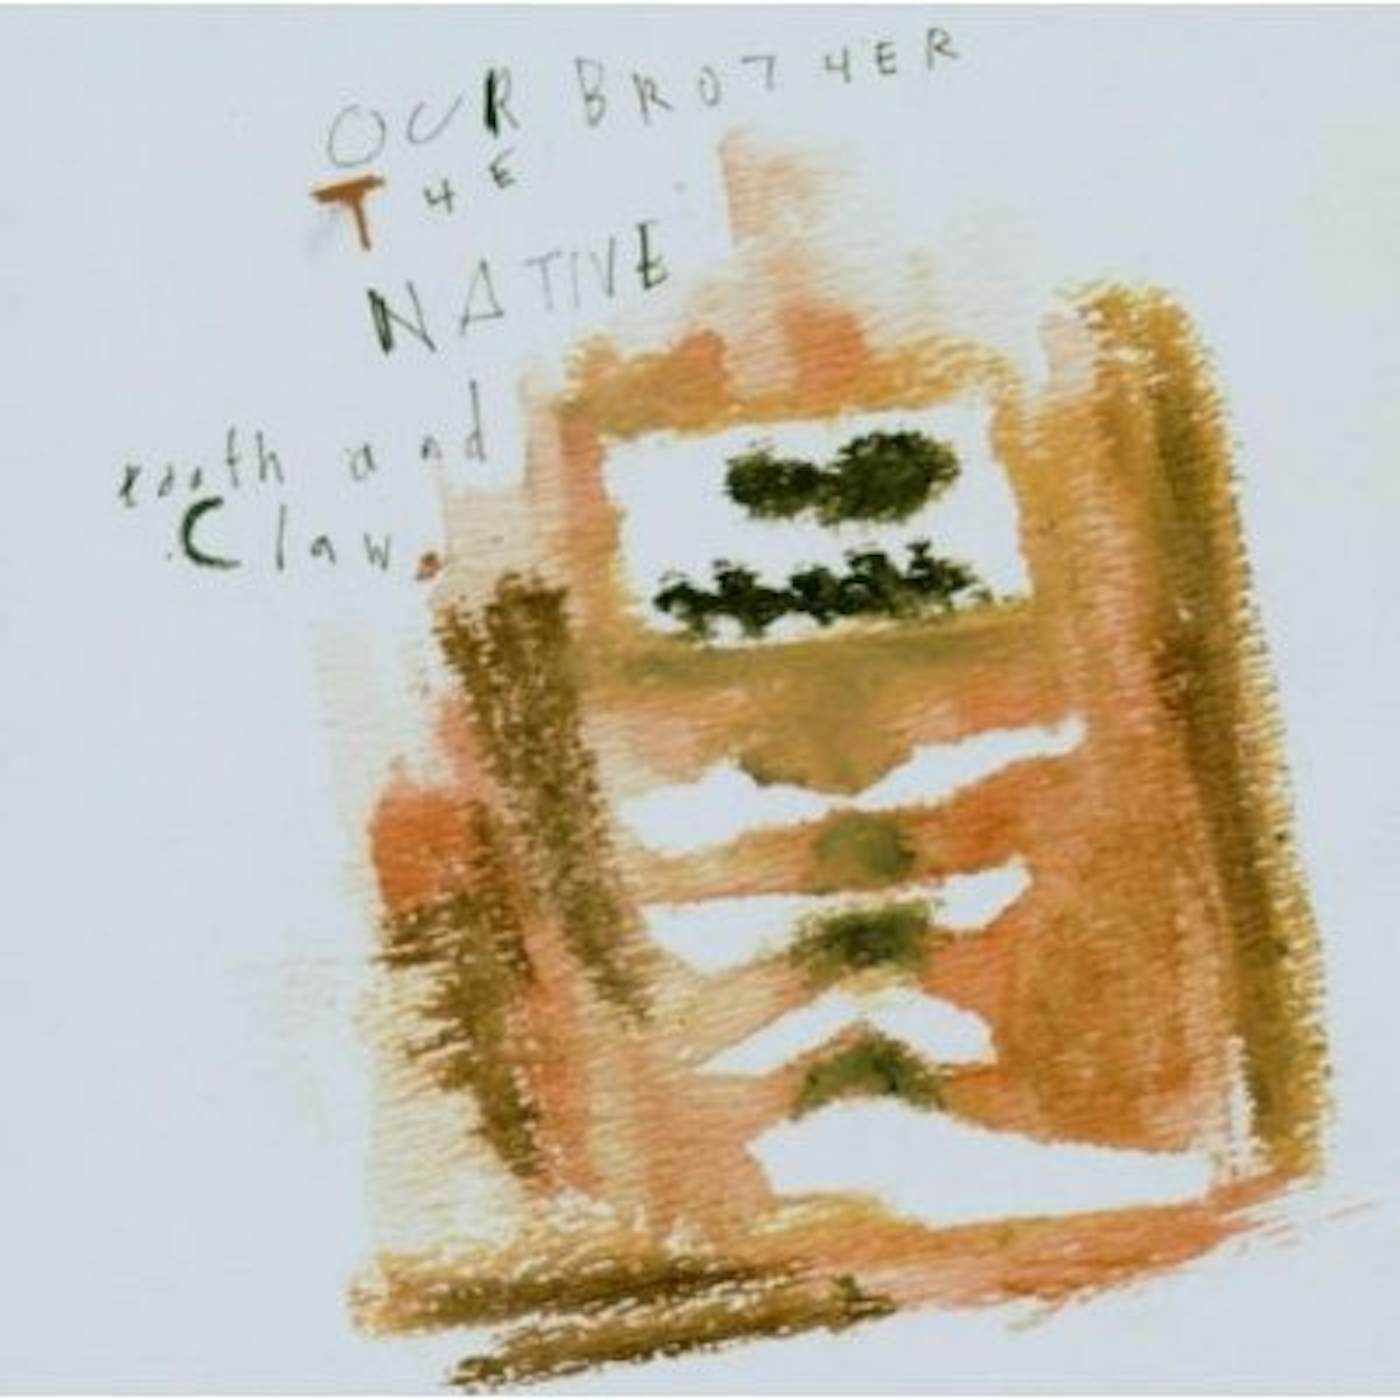 Our Brother The Native TOOTH & CLAW CD